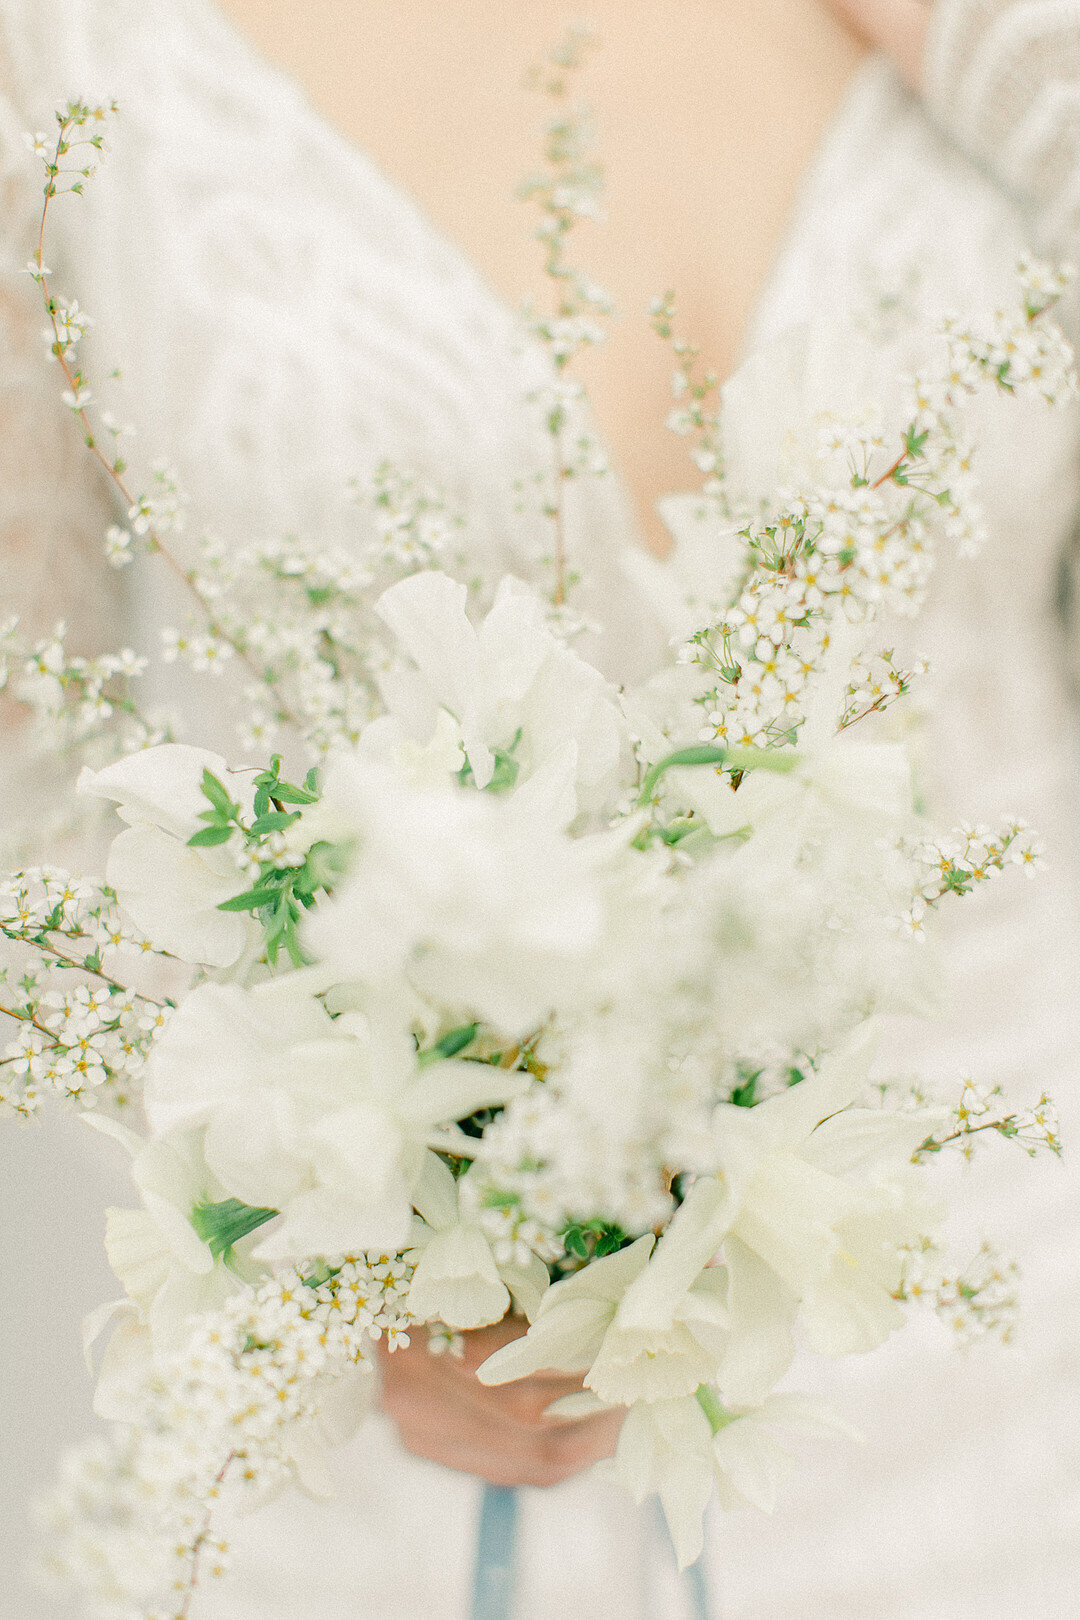 Spring has sprung in the Hudson Valley and this intimate wedding makes us want to lay in a field of_Krystal Balzer Photography _Publish -77_low